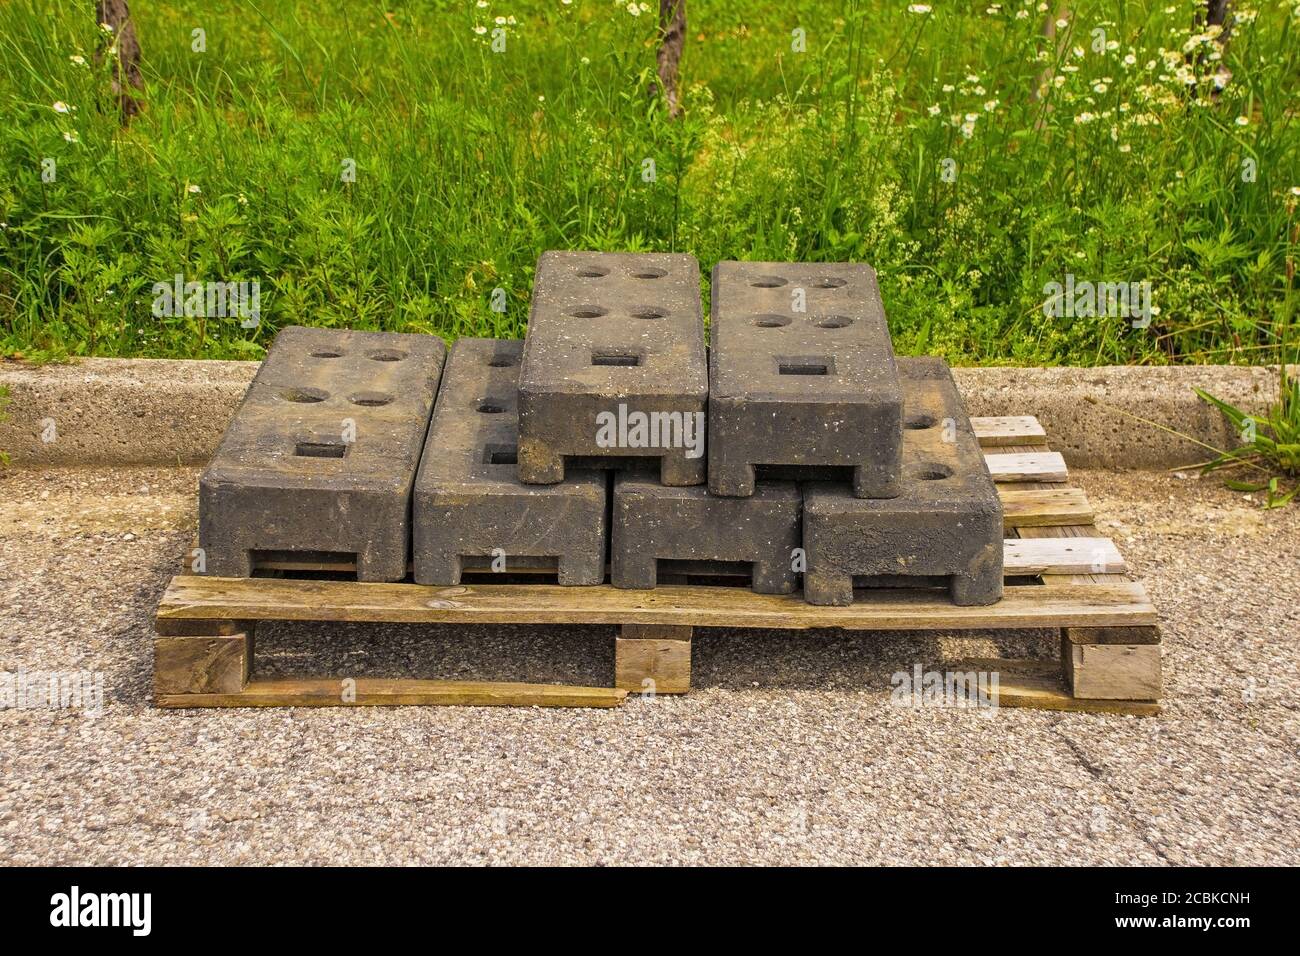 Weighted concrete temporary fence post bases for interlocking fence panels on wooden pallets at the site of sewer replacement works in NE Italy Stock Photo